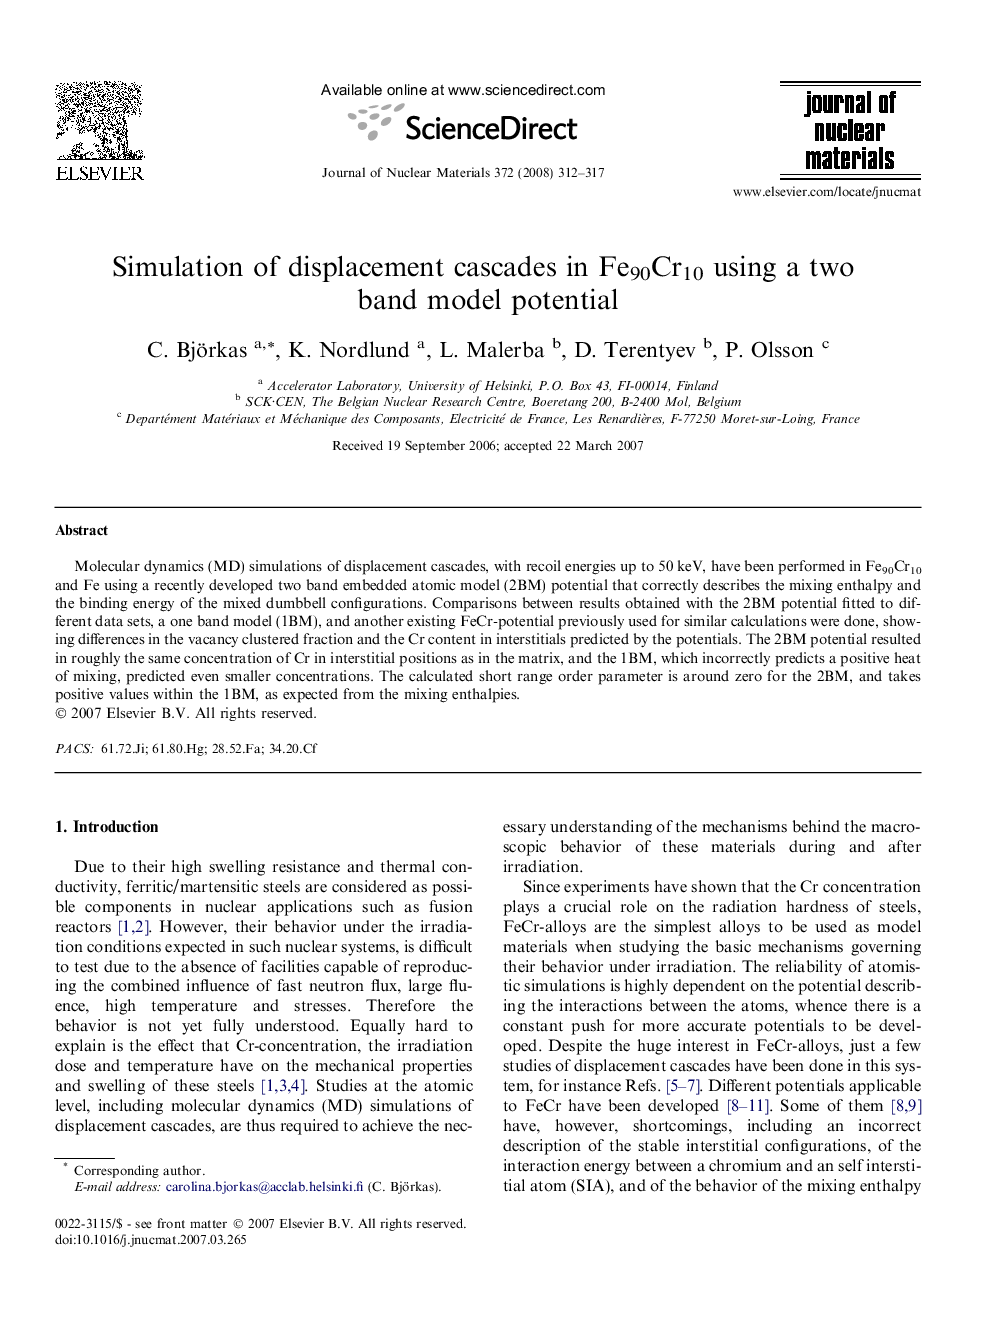 Simulation of displacement cascades in Fe90Cr10 using a two band model potential